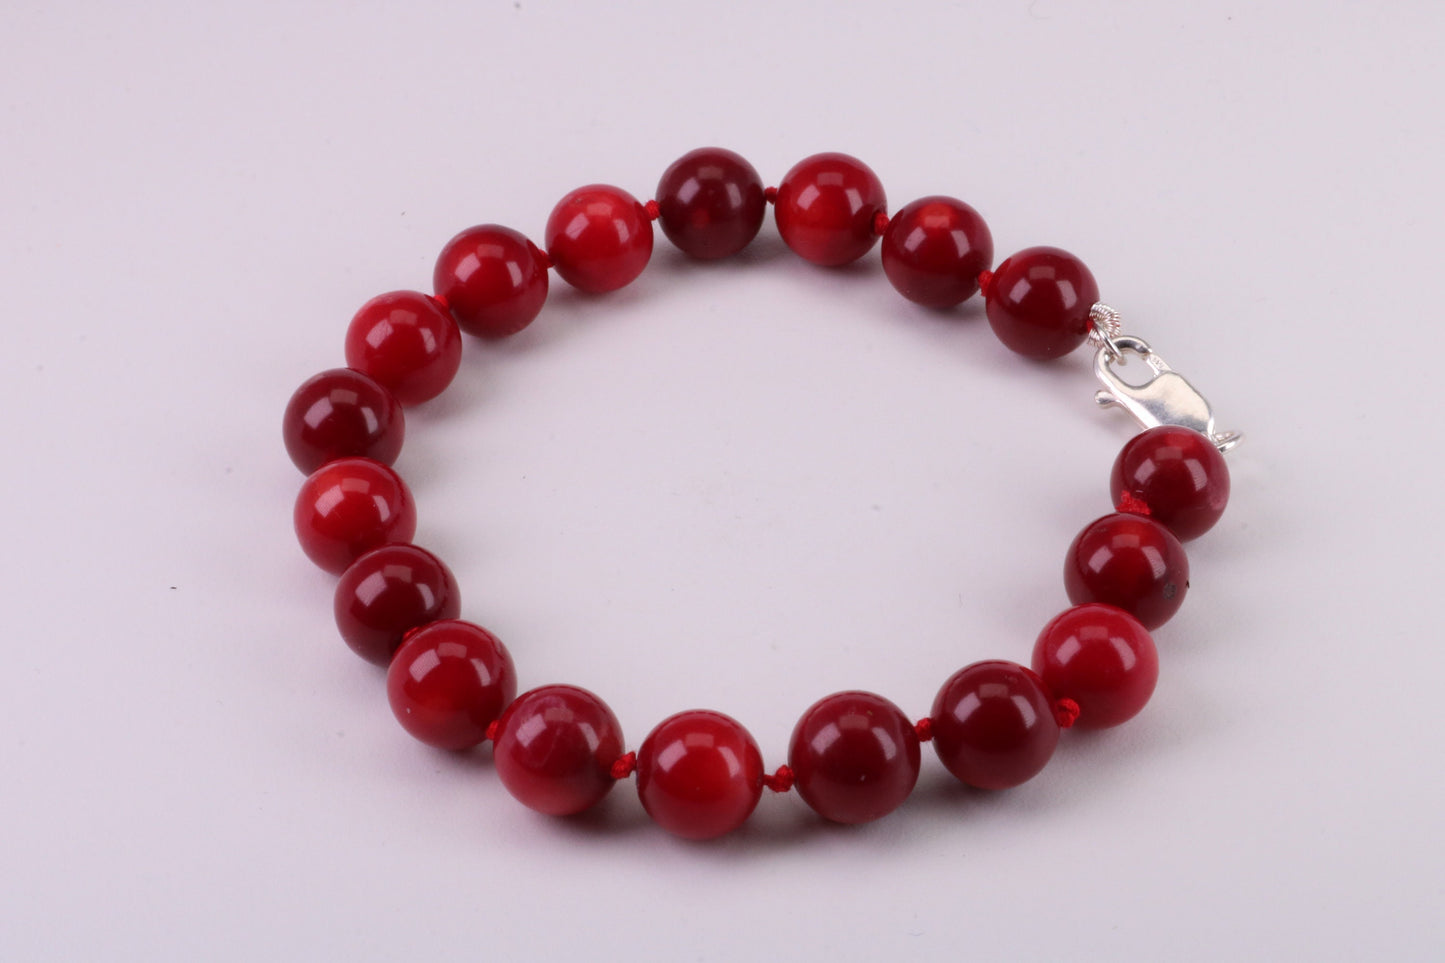 Natural 10 mm Round Red Coral Bracelet with Solid Silver Lobster Claw Lock